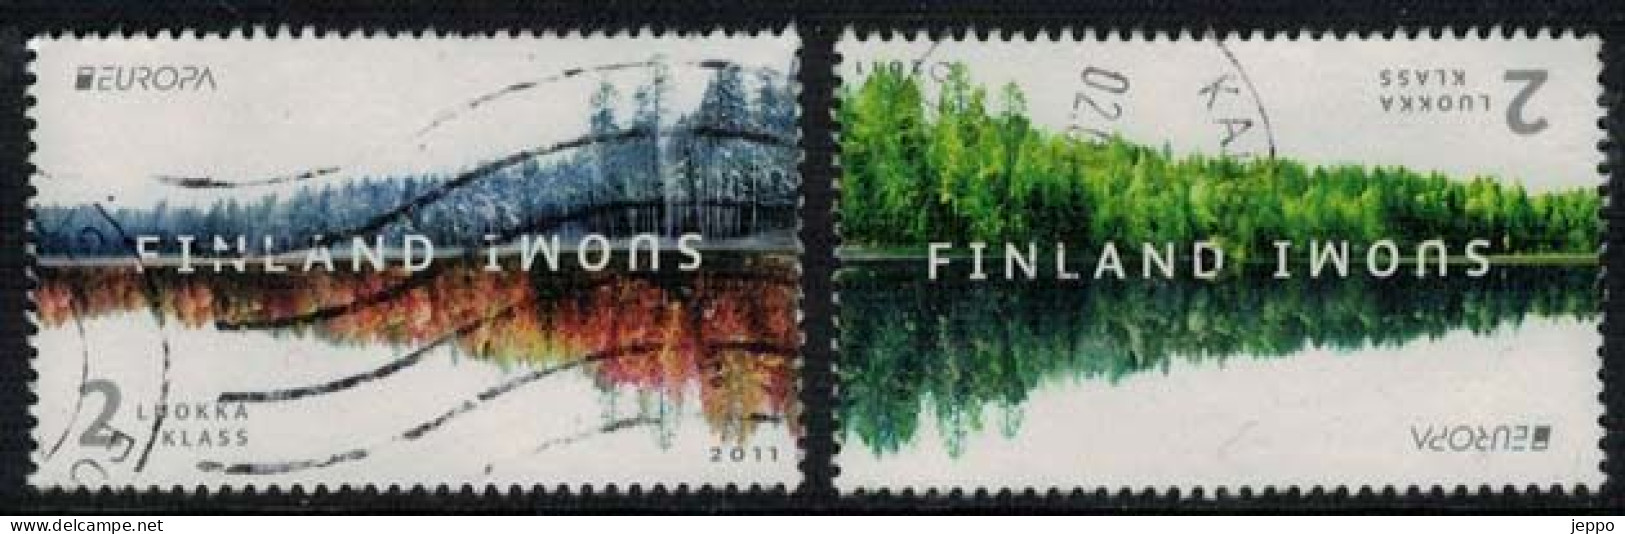 2011 Finland, Europa Cept Forrest Used Set. - Usati